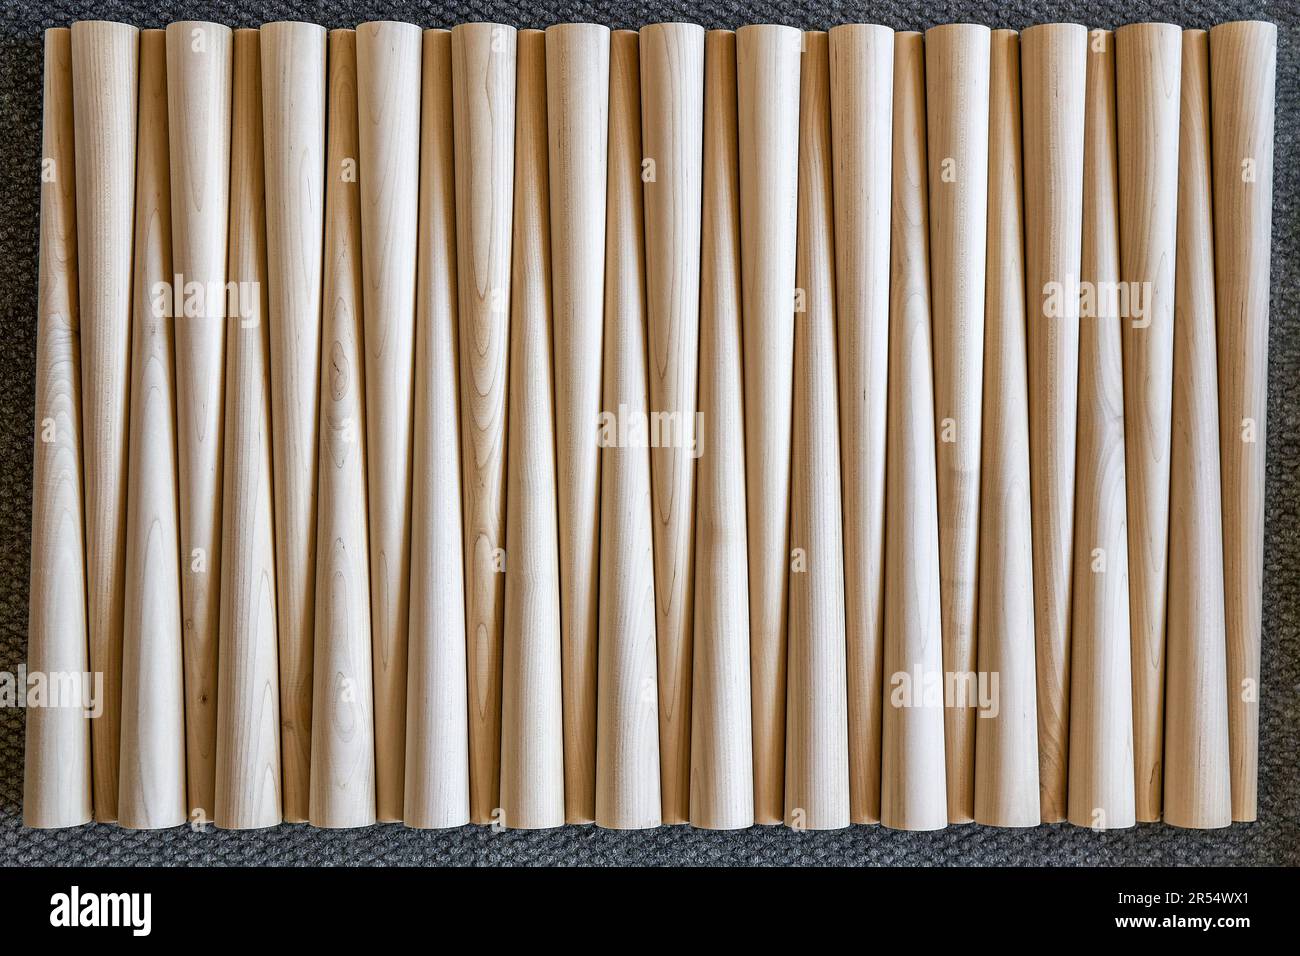 Pattern of polished conical wooden table legs on the gray carpet upper view. Prepared furniture details in furniture manufacturing workshop Stock Photo